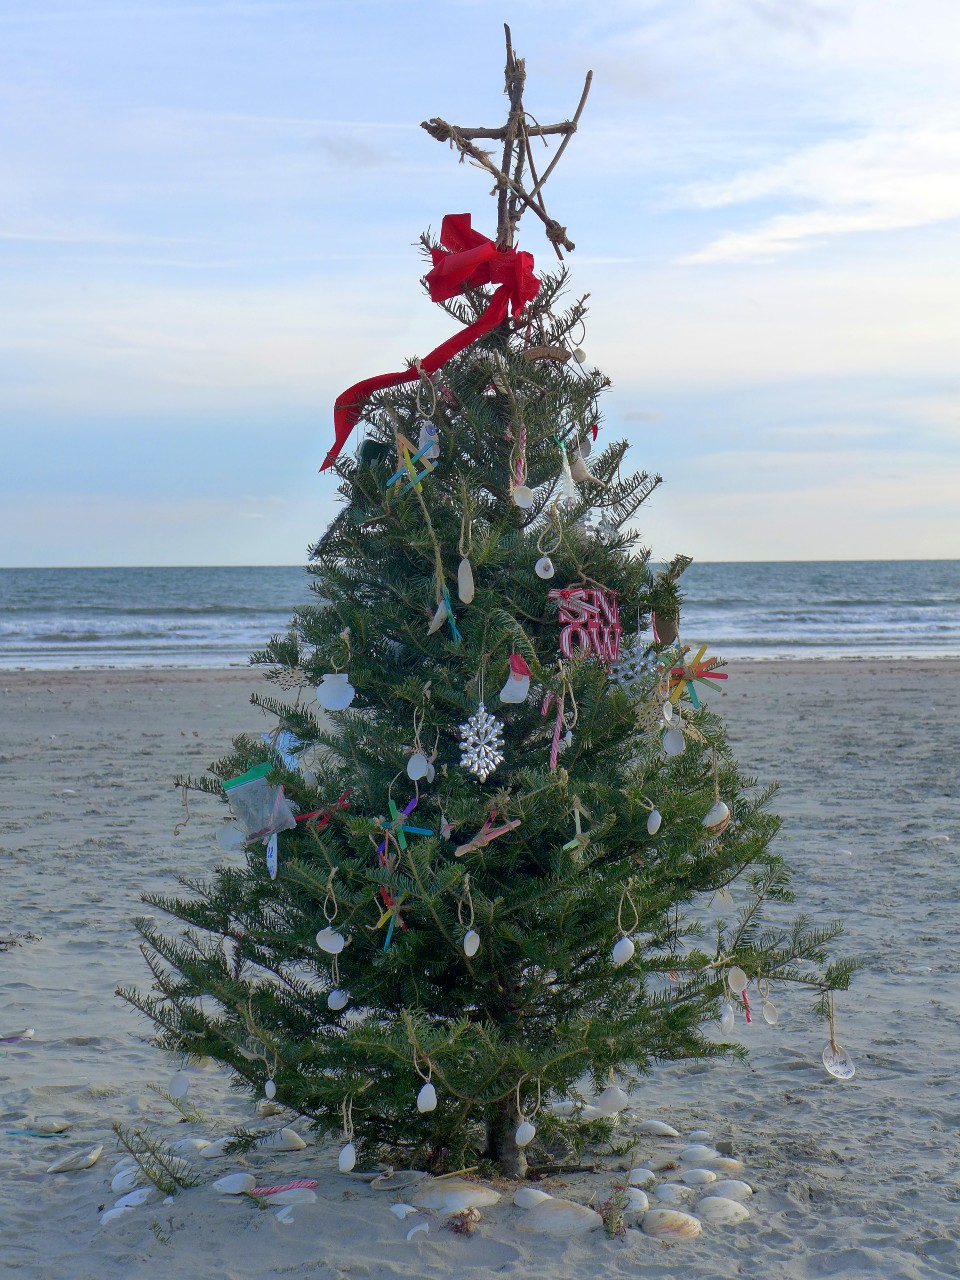 Christmas tree at Easton's Beach in Newport, R.I.